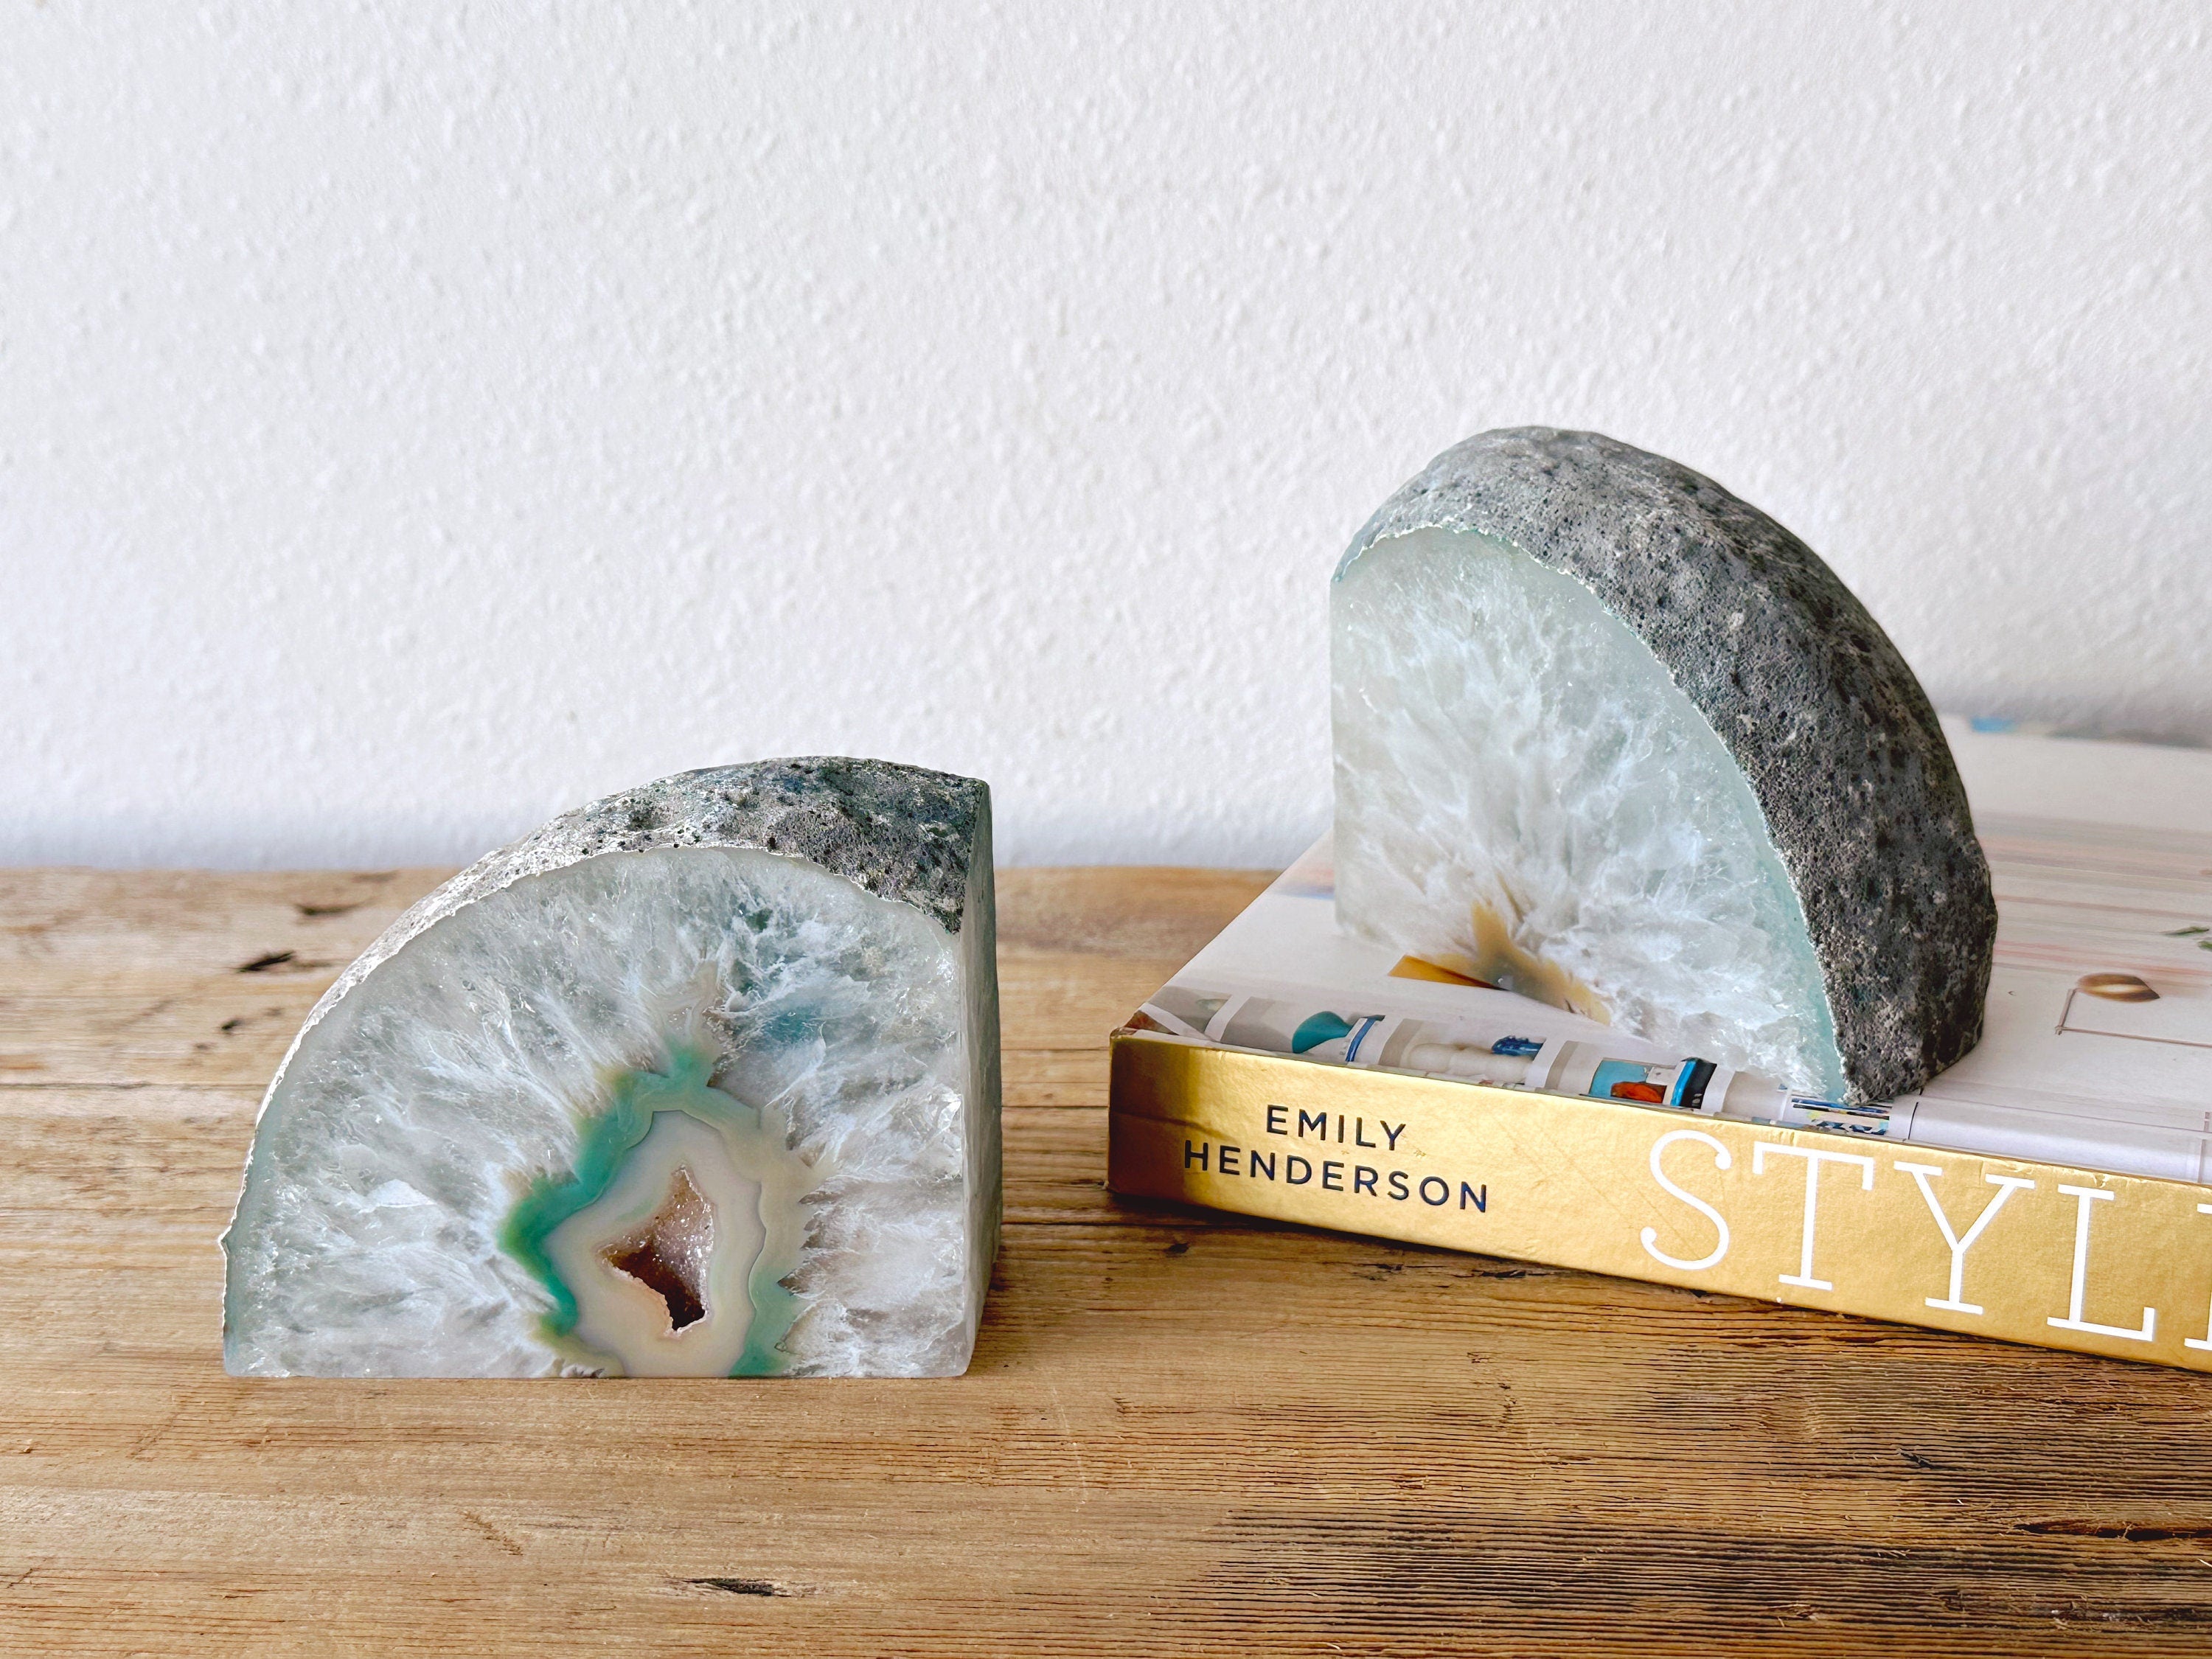 Pair of Natural Brazilian Agate Geode Stone Bookends | Blue Banded Agate Gemstone Bookends | Office Bookshelf Decor | Housewarming Gift